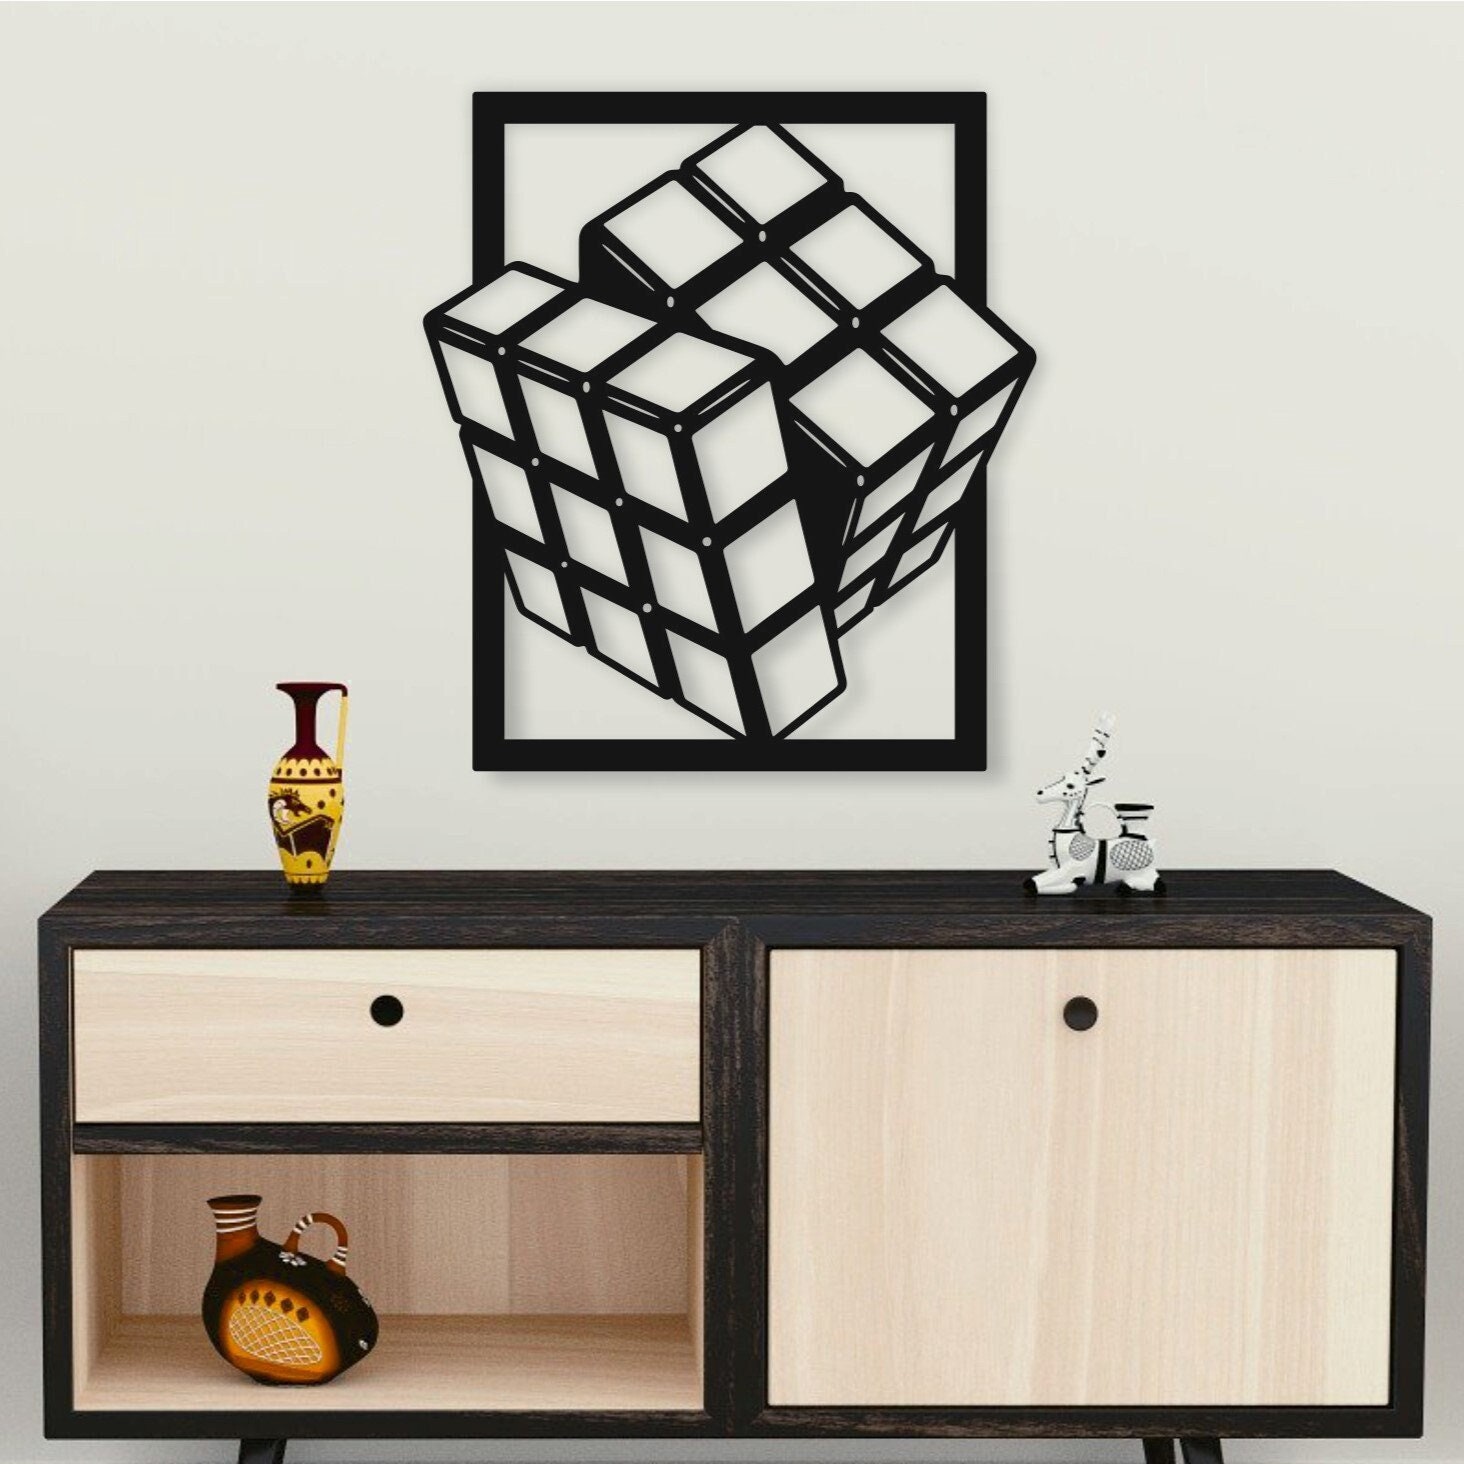 BUY Wooden Rubik's Cube Puzzle ON SALE NOW! - Wooden Earth